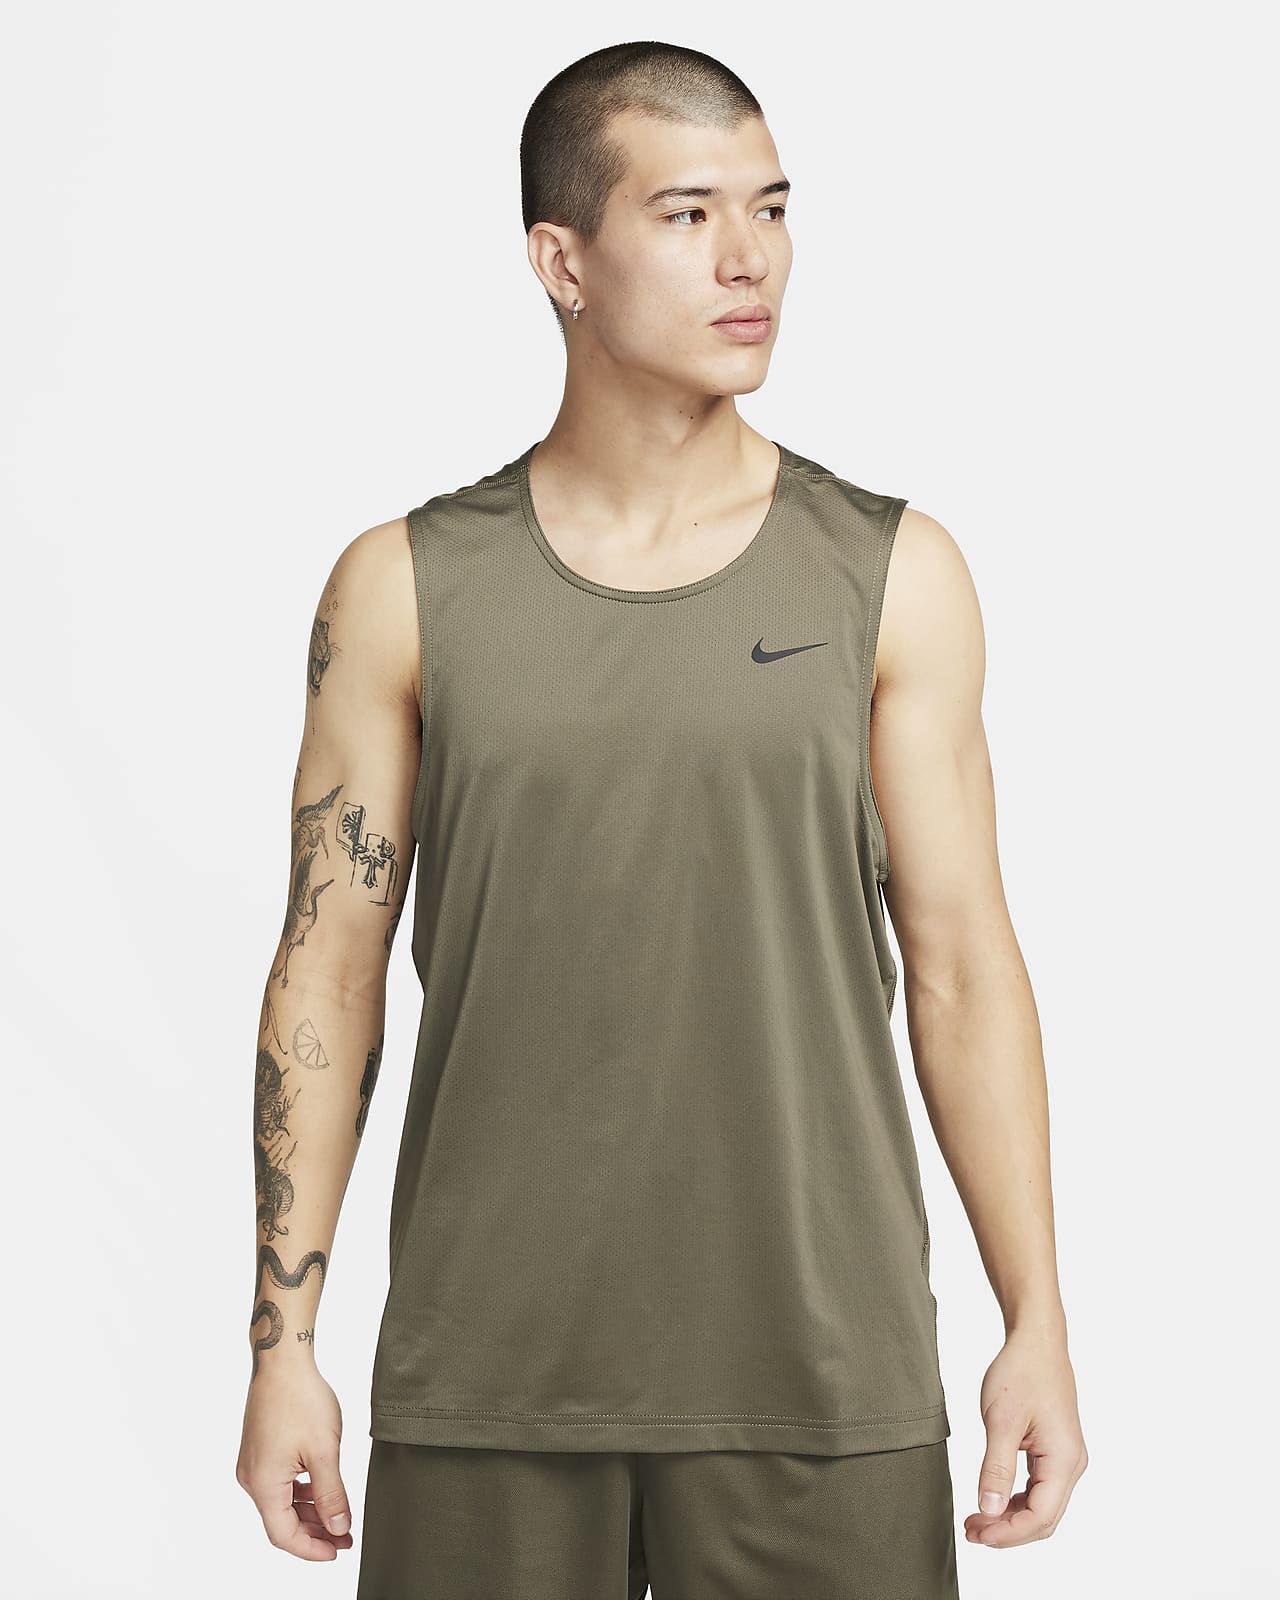 Muscle Gym Tank -  Canada